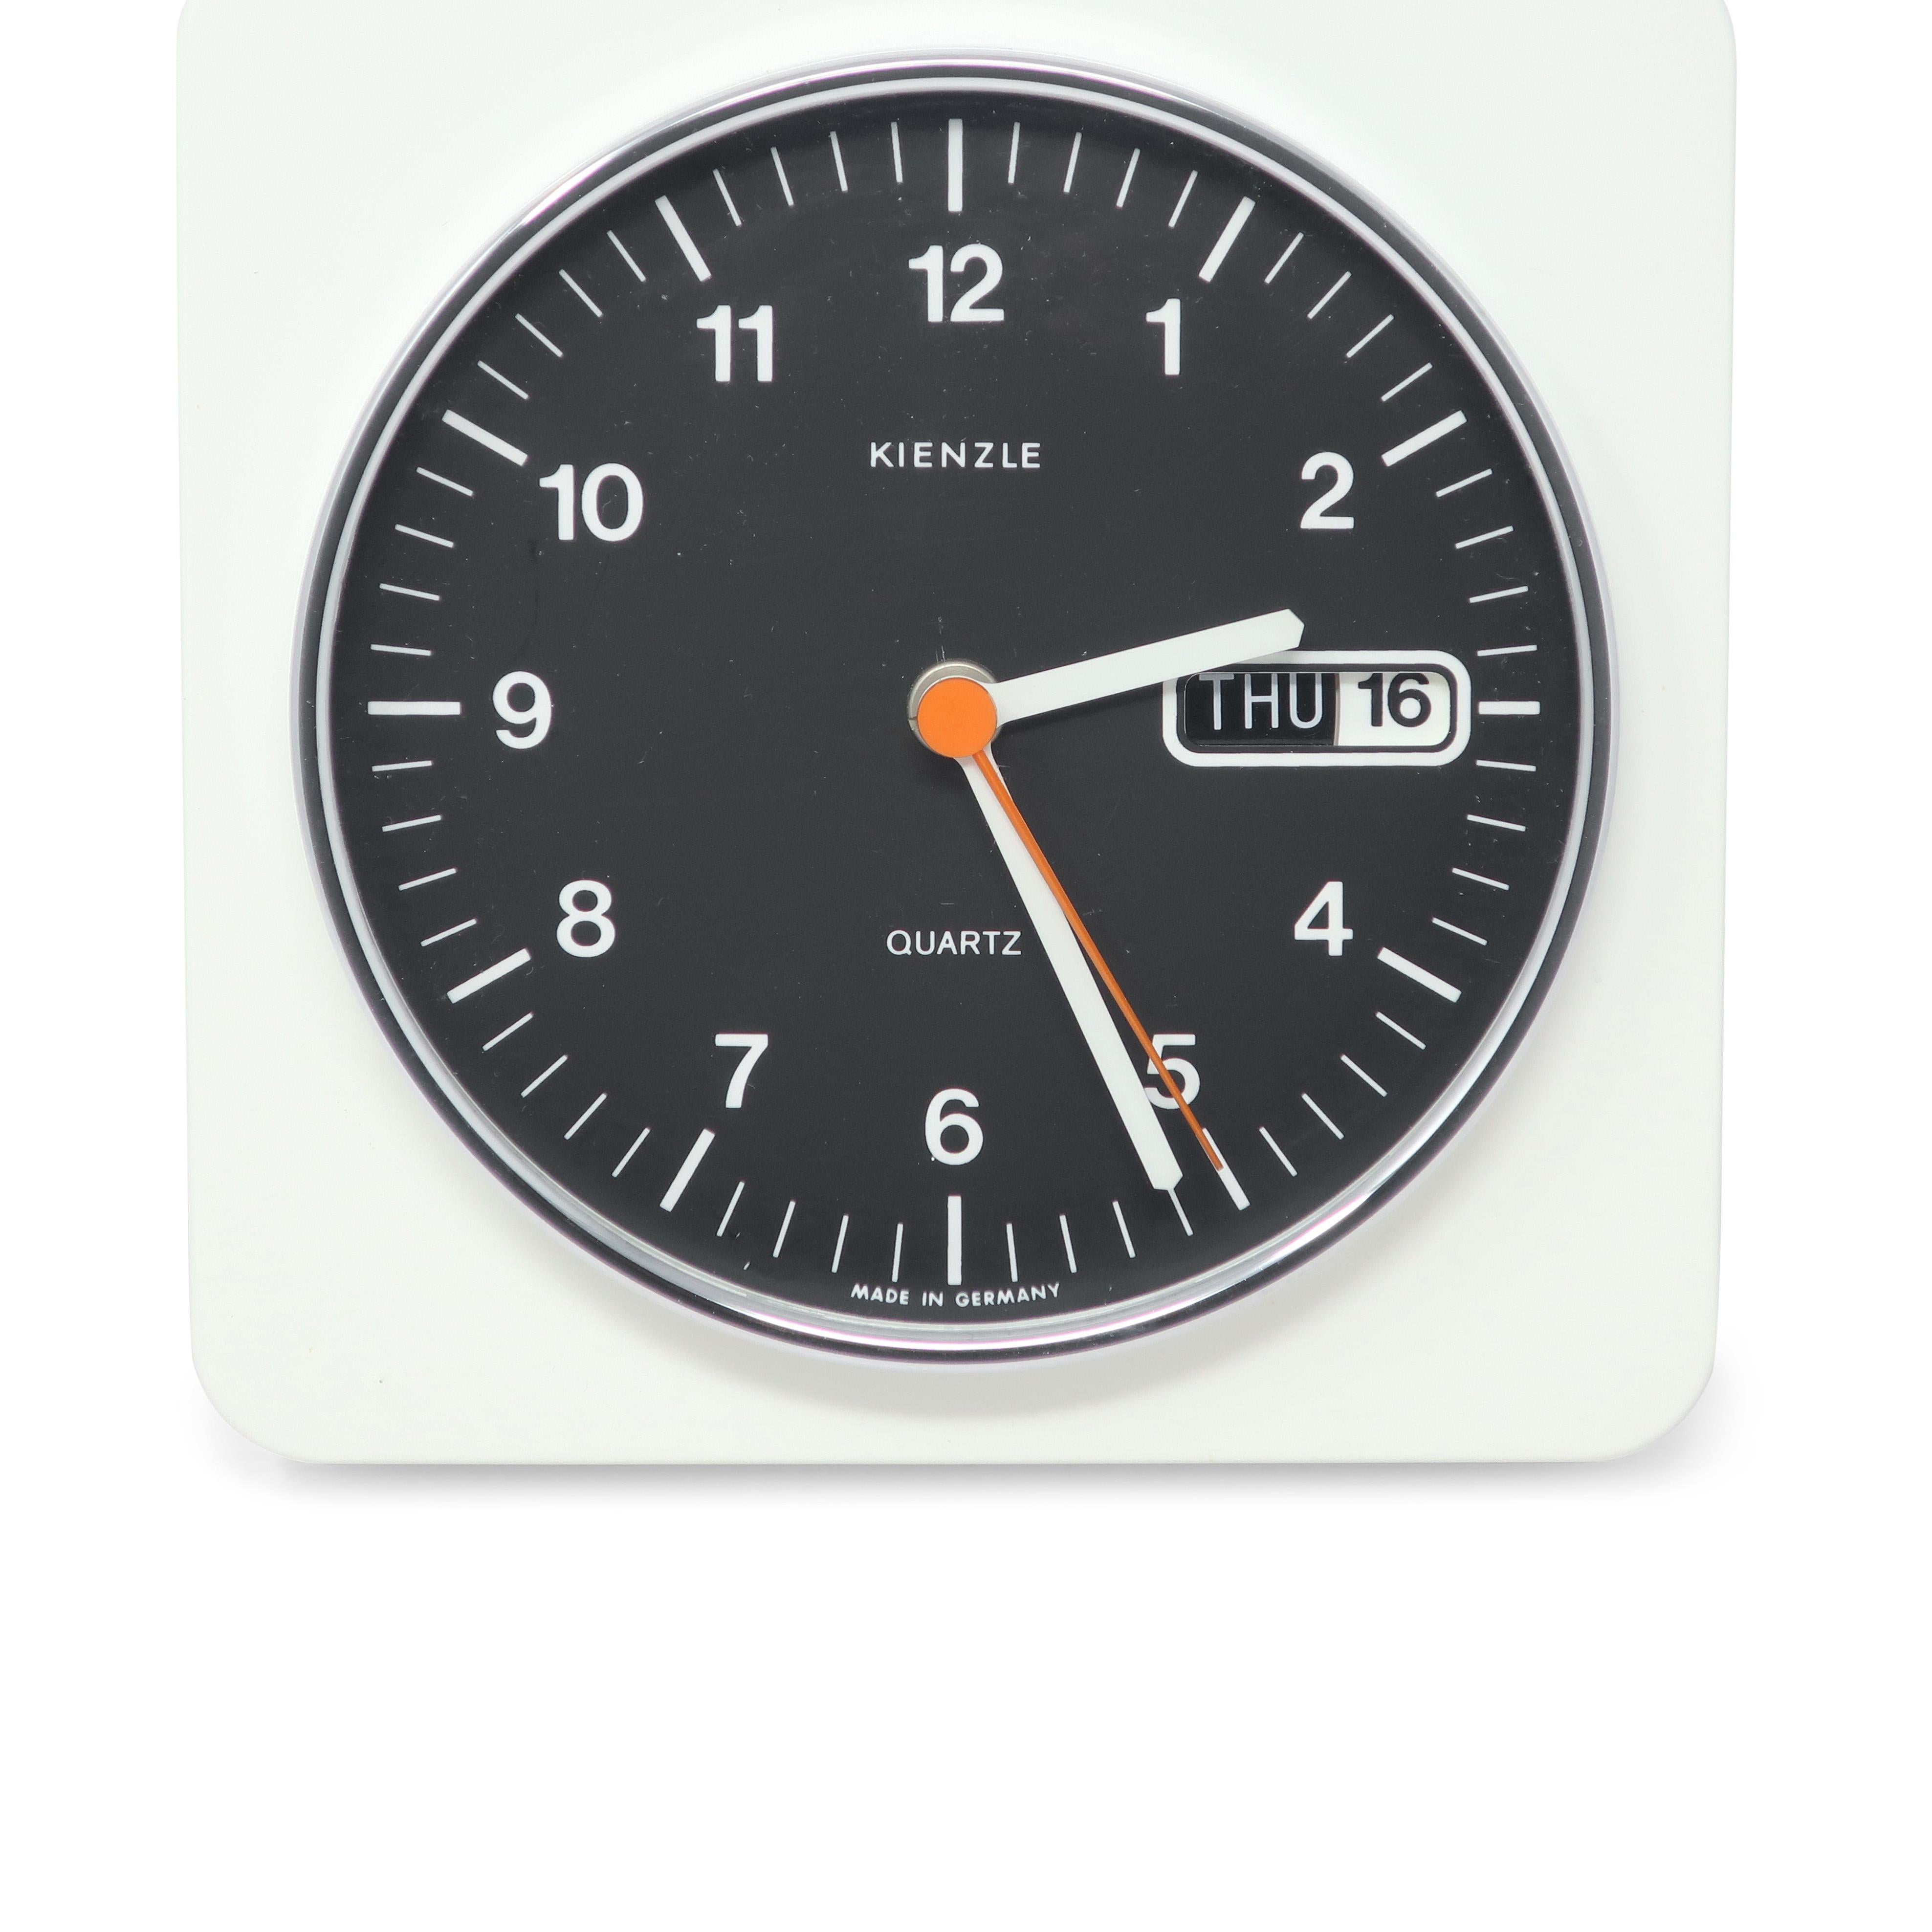 A vintage mid-century modern white, black, and chrome wall clock by German clock manufacturer Kienzle.  Body of this Space Age clock is white plastic, the face is black, and the numbers and hands are white, all of which provides a striking contrast